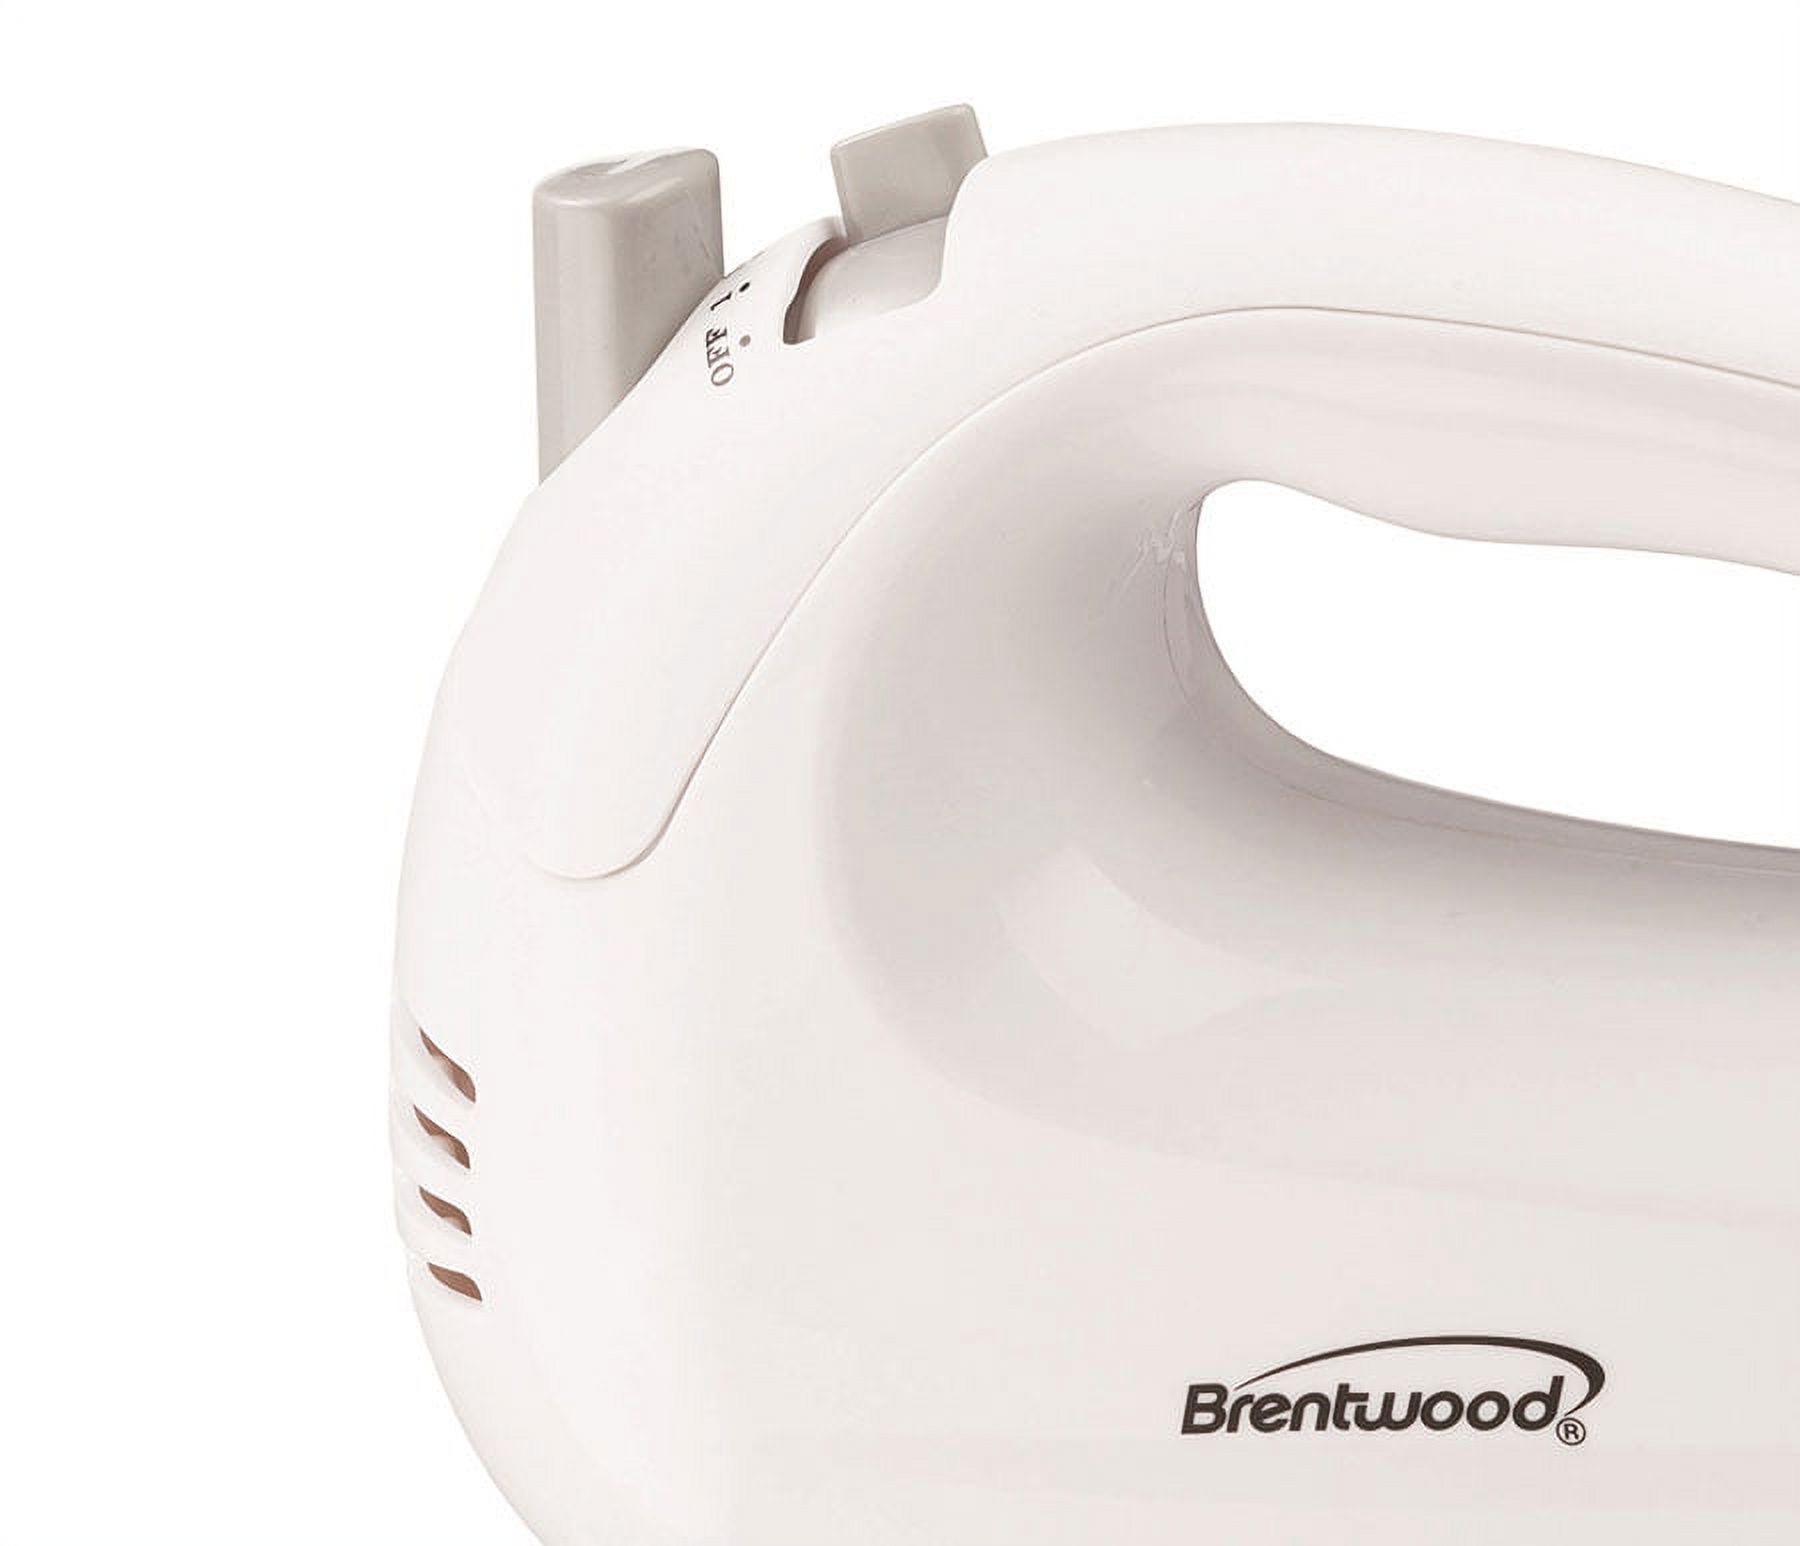 Brentwood HM-45 Lightweight 5-Speed Electric Hand Mixer, White - image 3 of 8